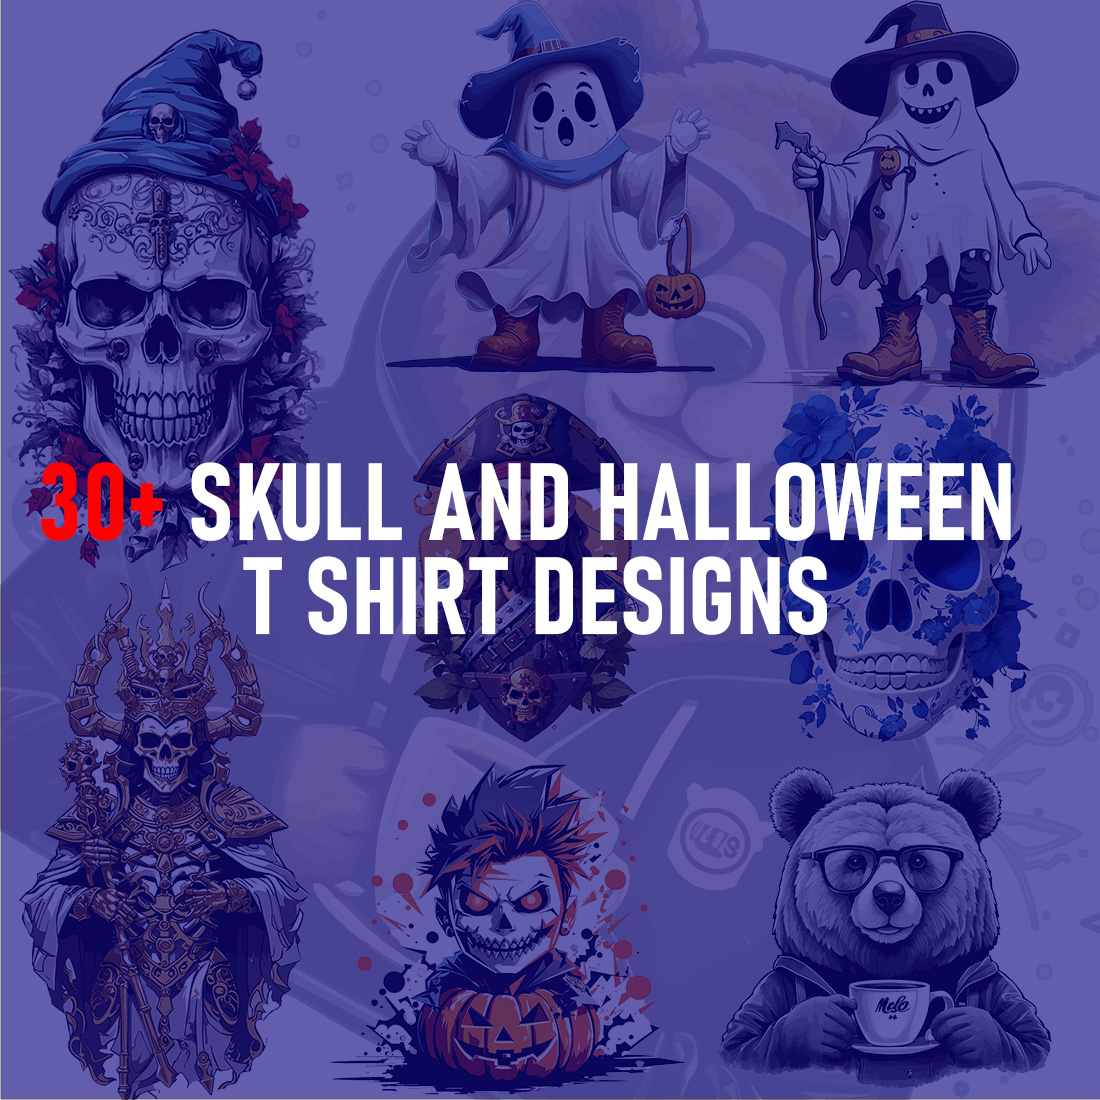 30+ Halloween and Skull T shirts Designs cover image.